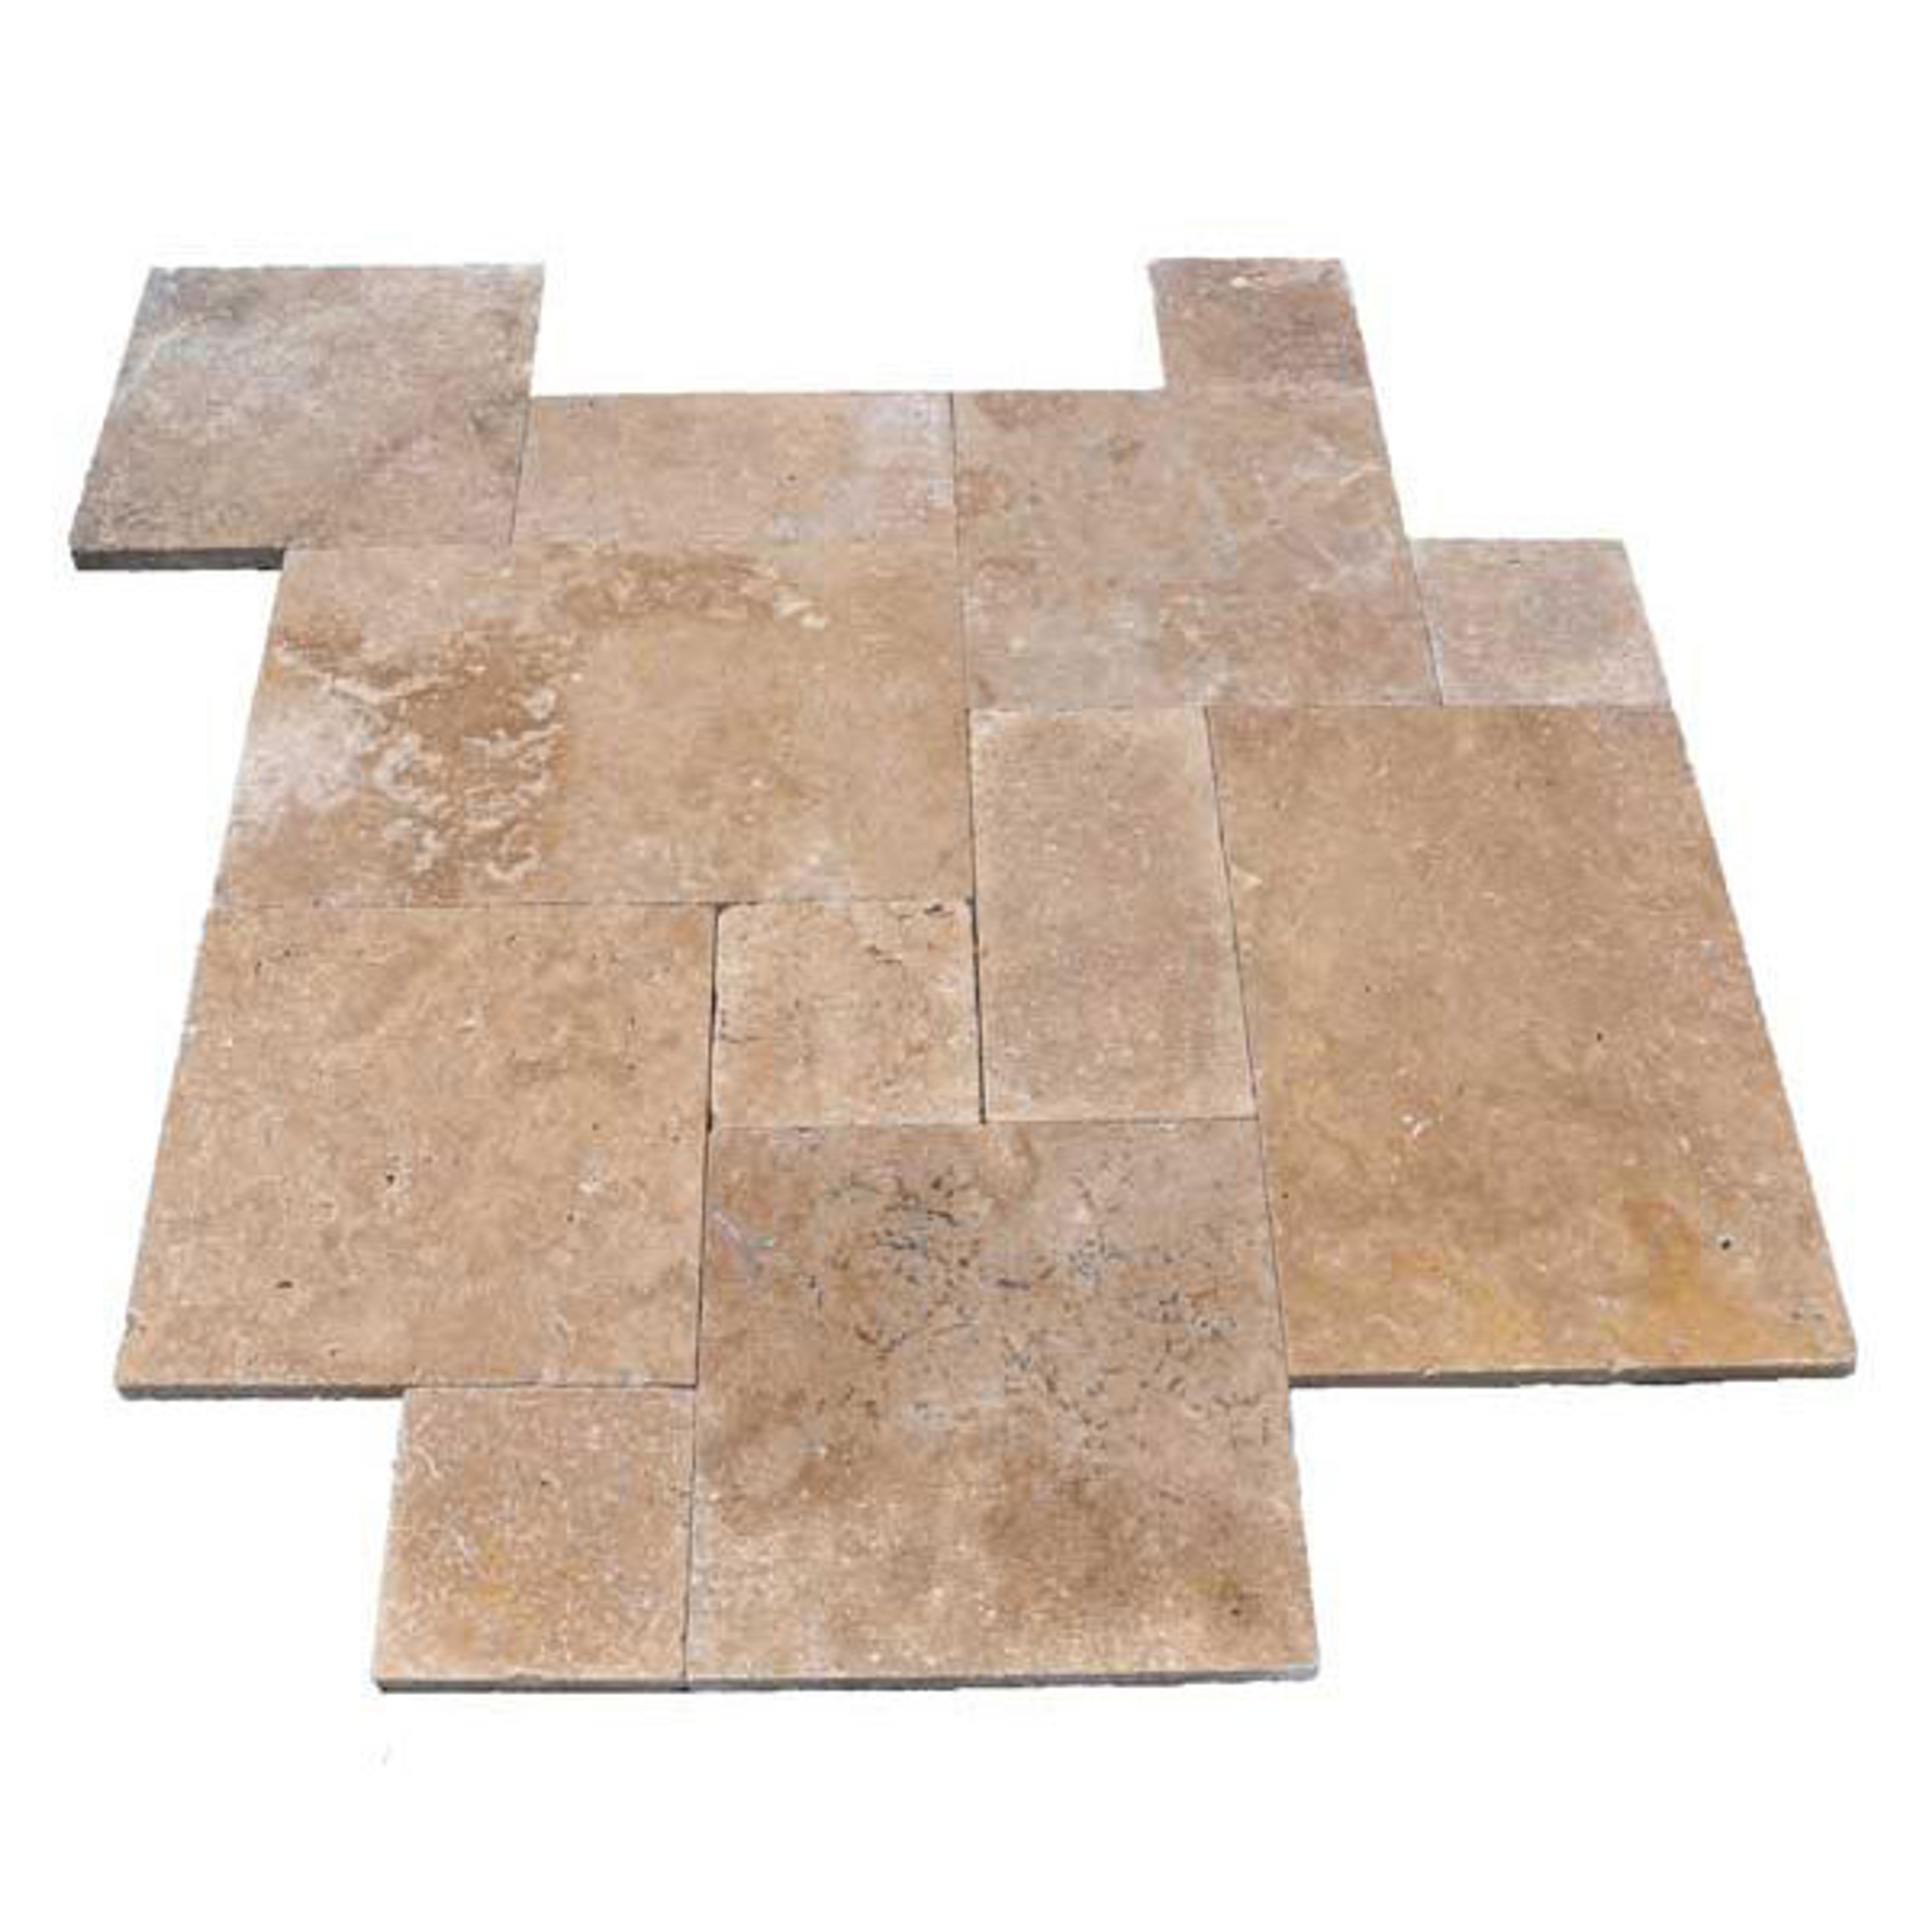 Premium Select French Pattern Noce Tumbled Travertine Tiles